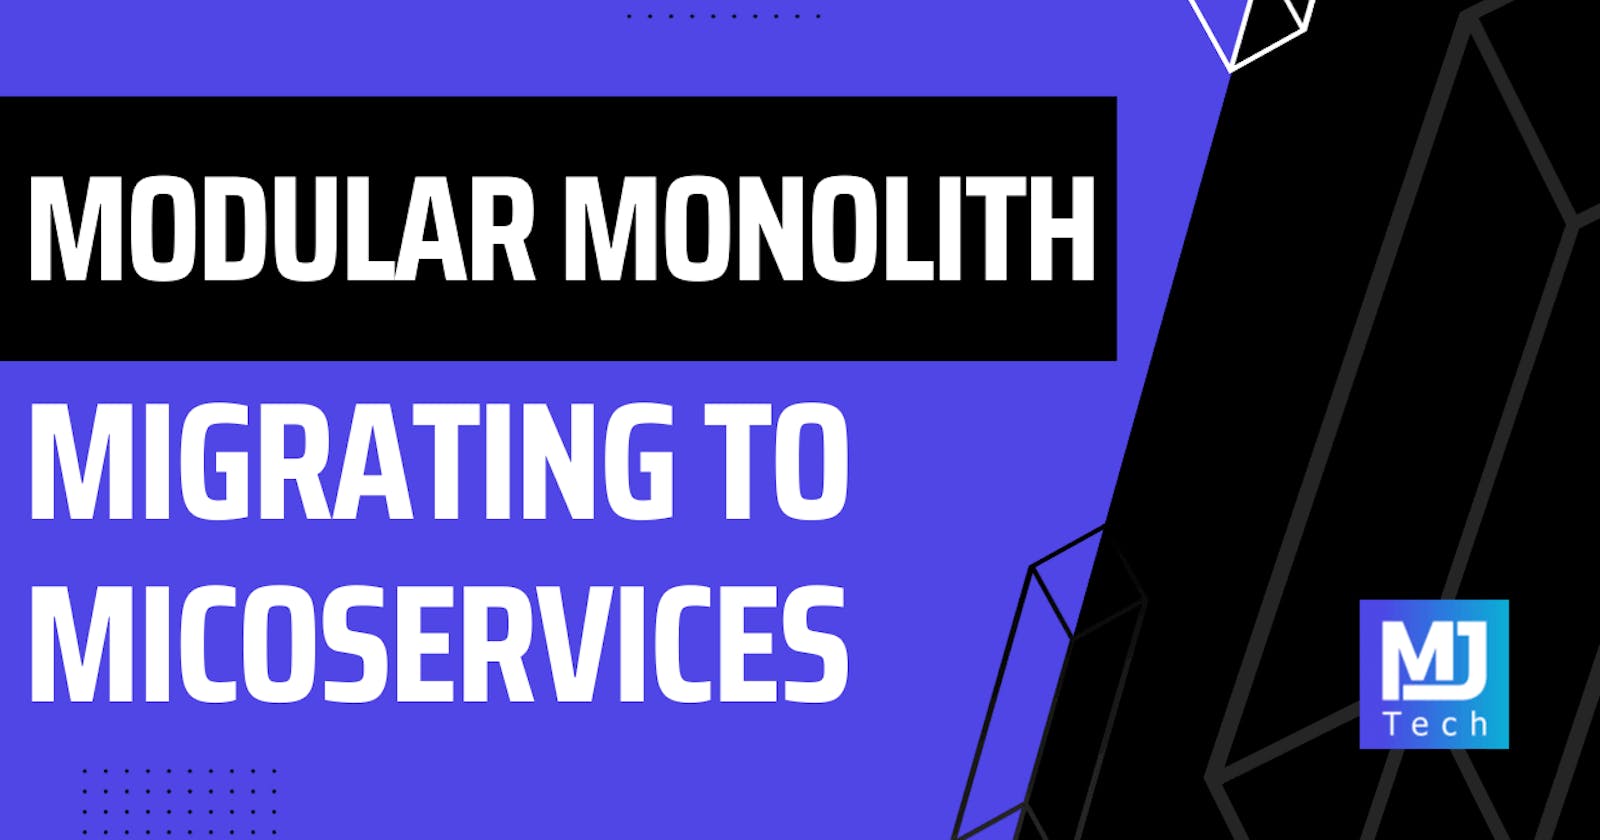 Monolith to Microservices: How a Modular Monolith Helps